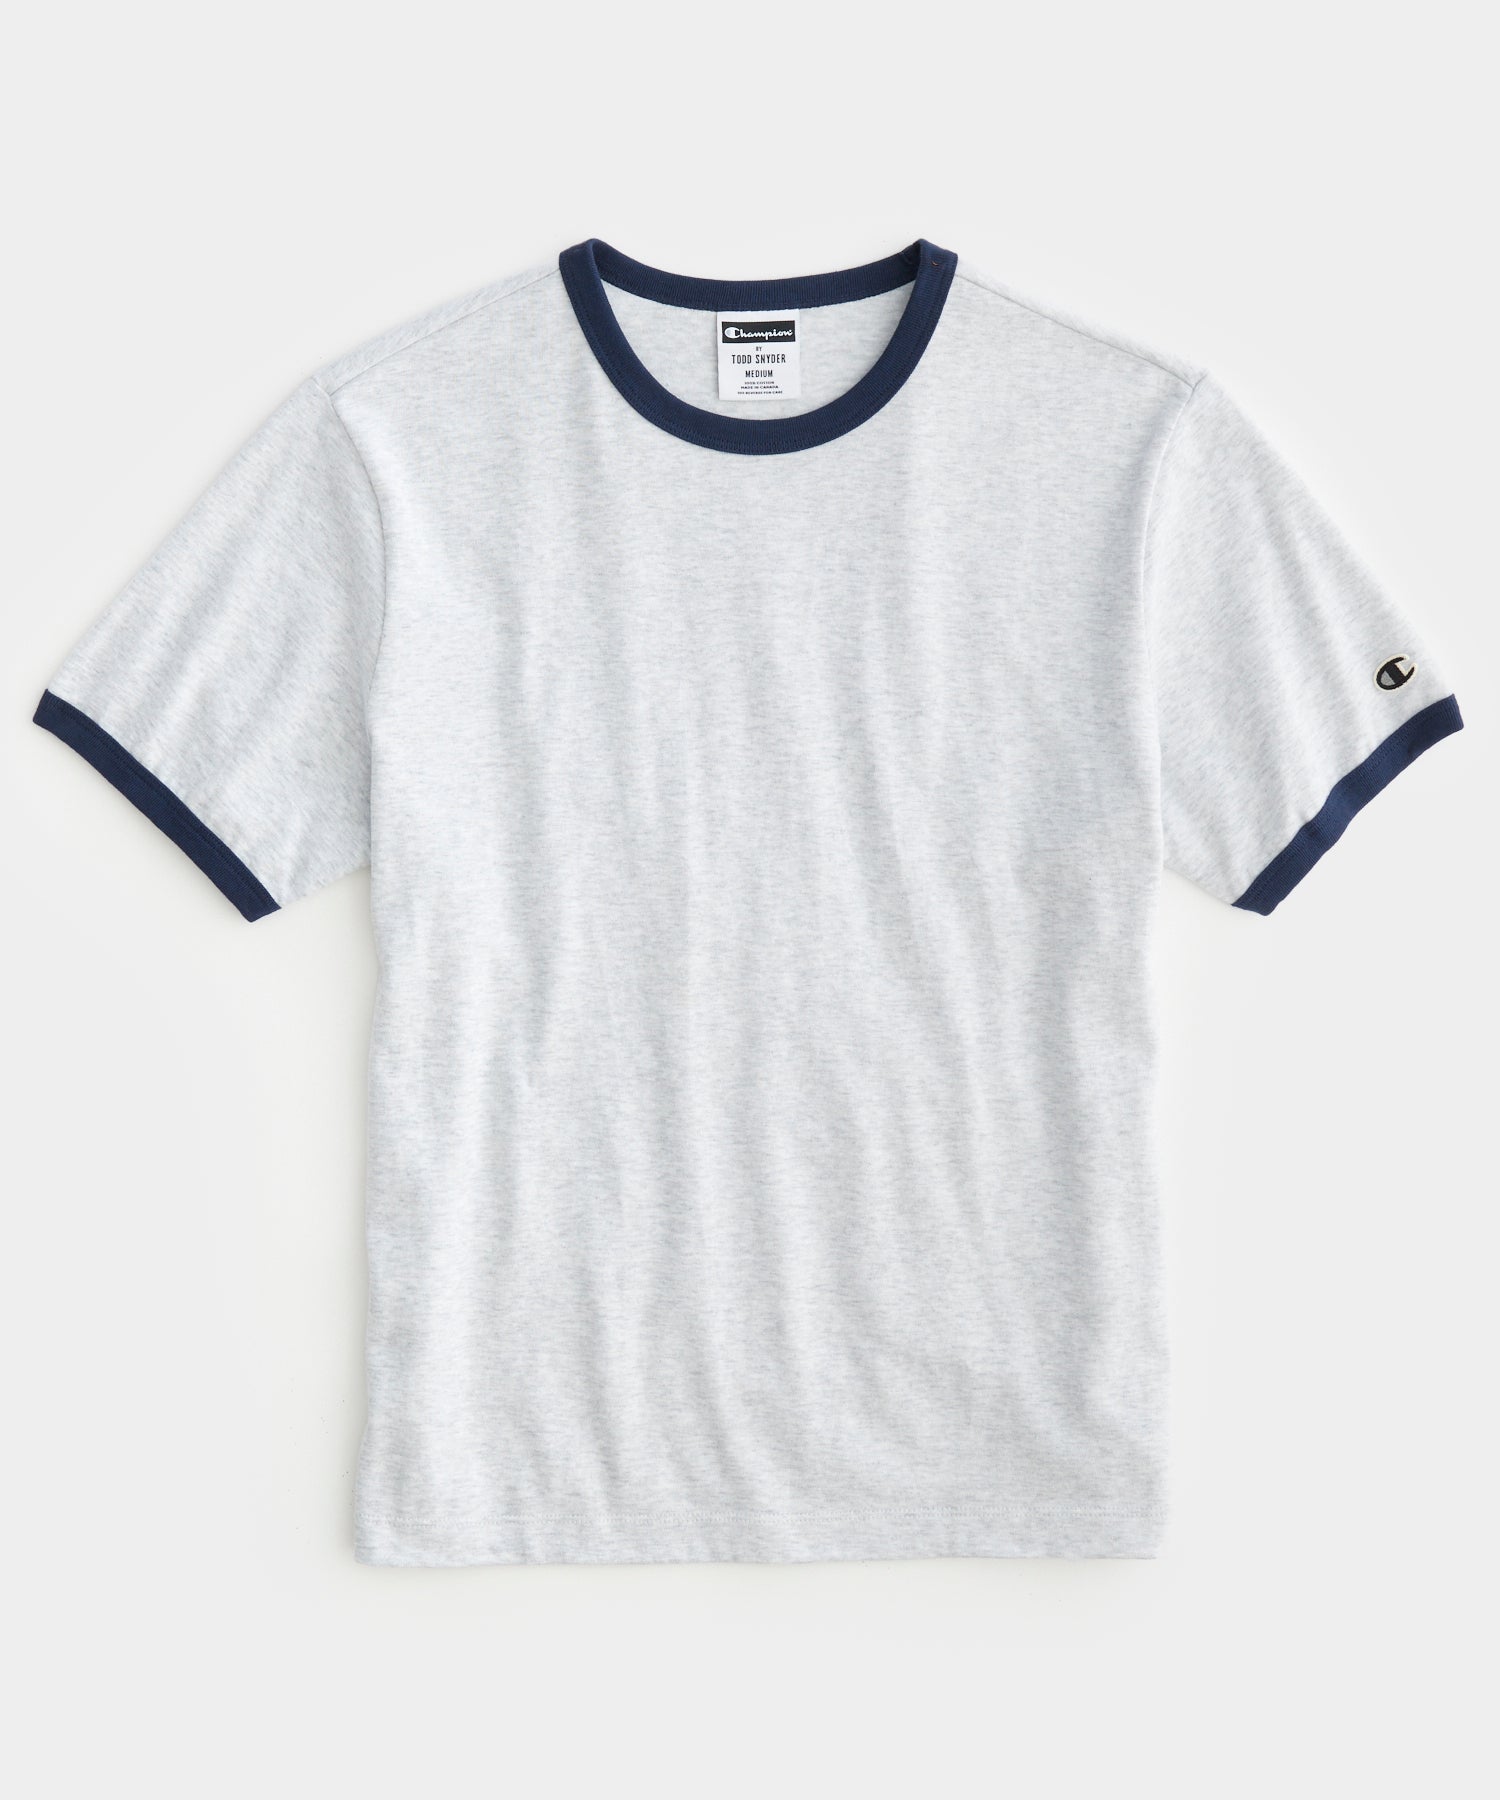 Champion Ringer Tee in Silver Mix